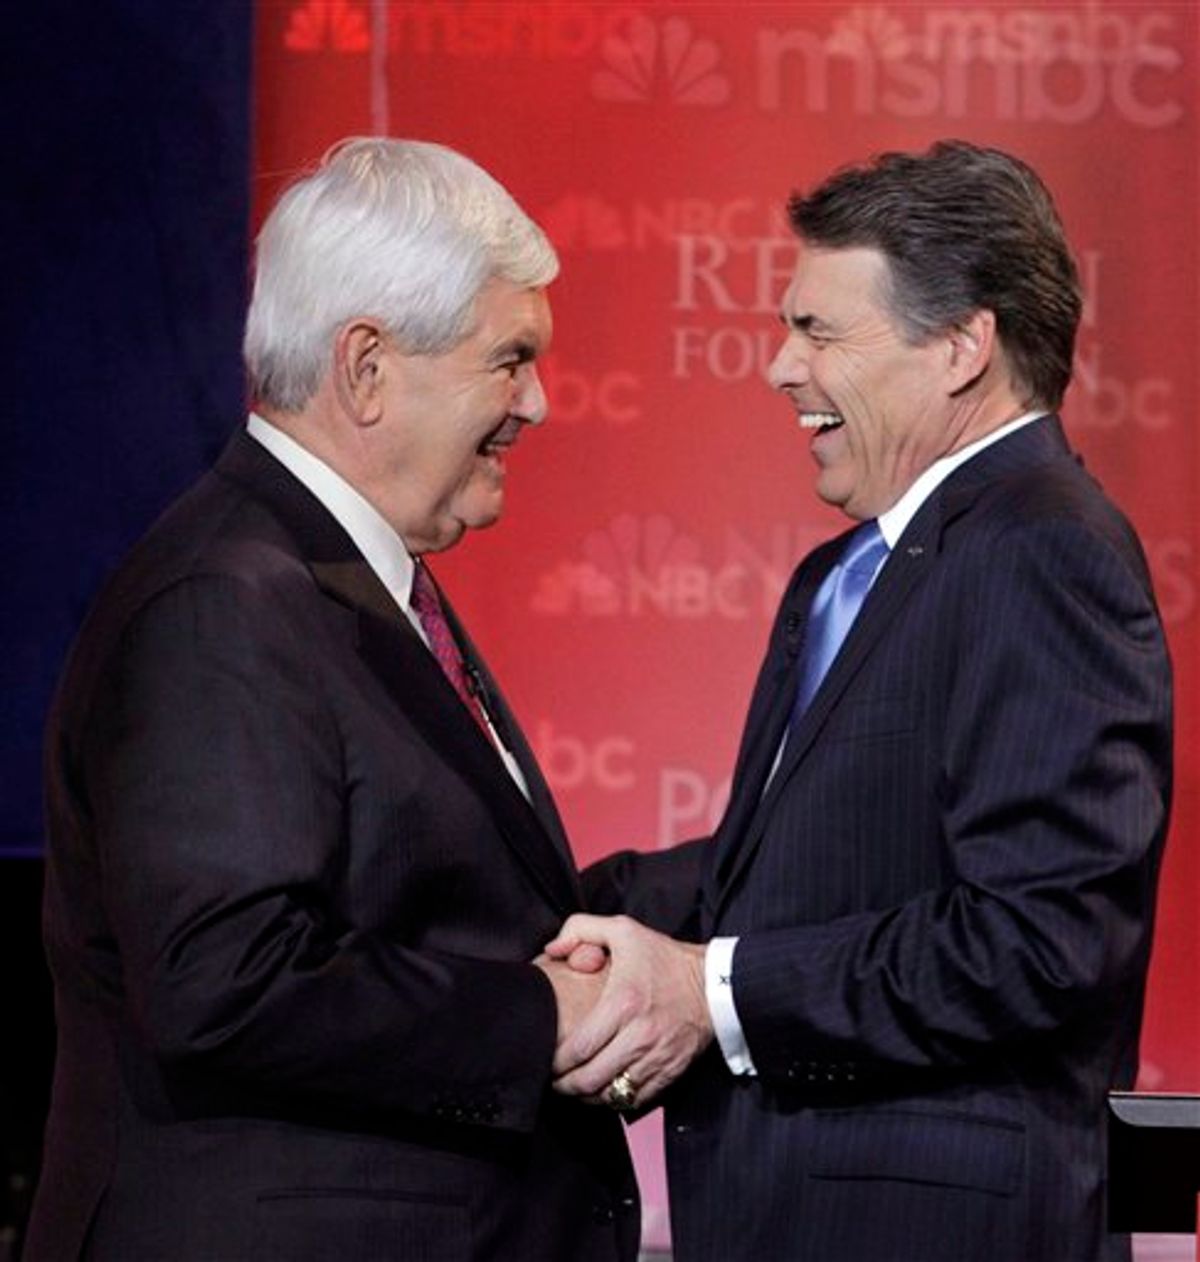 Republican presidential candidates former House Speaker Newt Gingrich, left, and Texas Gov. Rick Perry share a laugh during a break at a Republican presidential candidate debate at the Reagan Library Wednesday, Sept. 7, 2011, in Simi Valley, Calif.  (AP Photo/Jae C. Hong)  (AP)